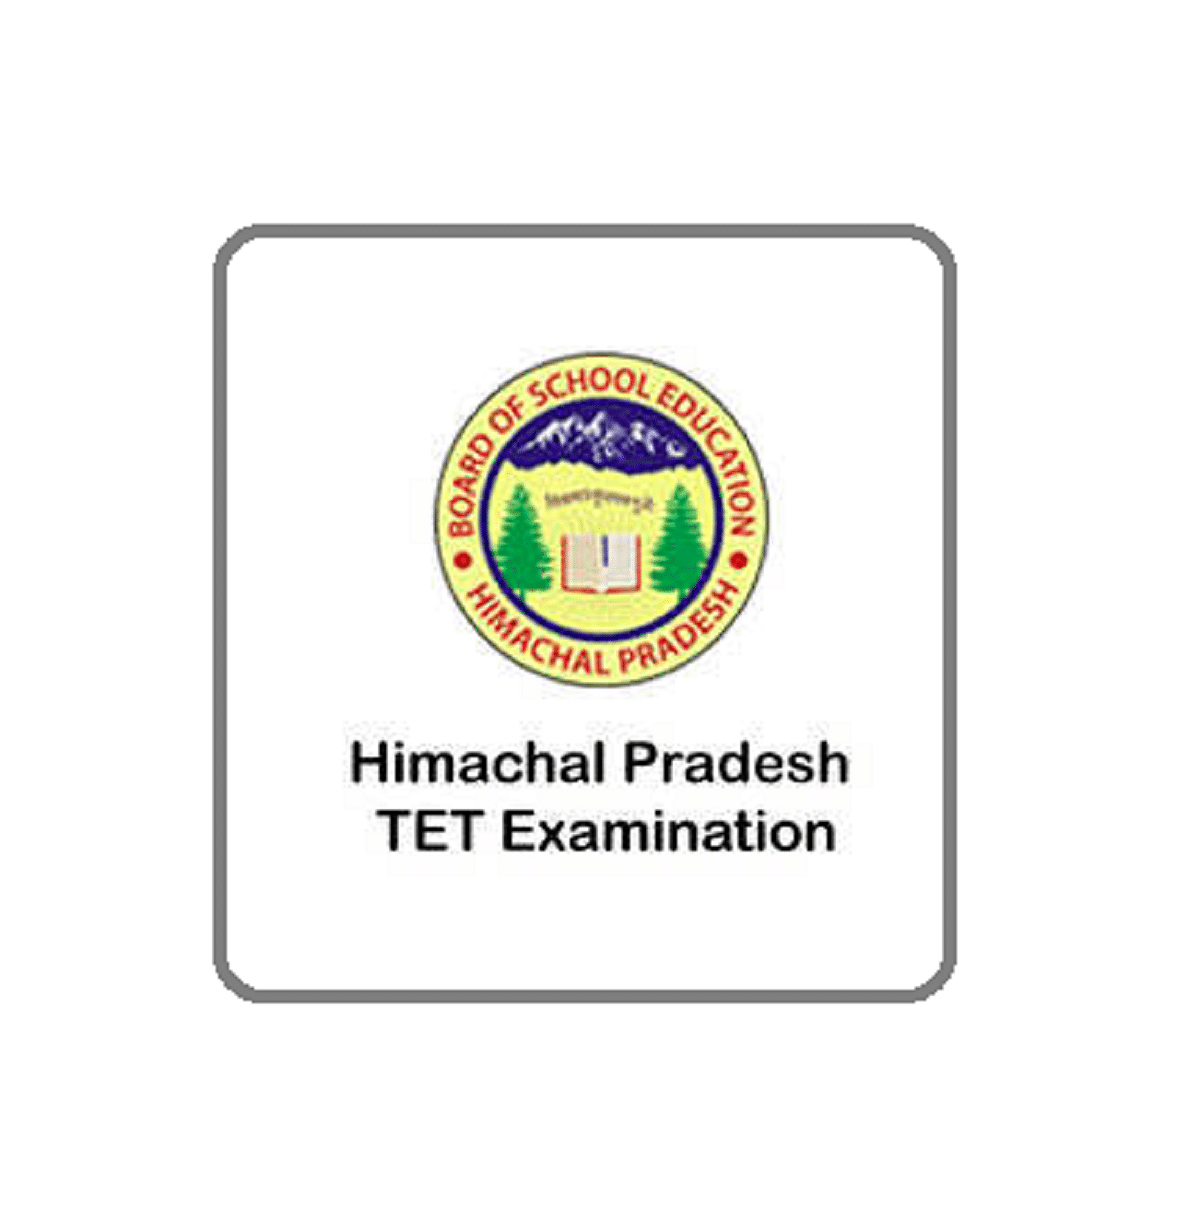 HP TET 2019 Answer Key Released, Direct Link Here